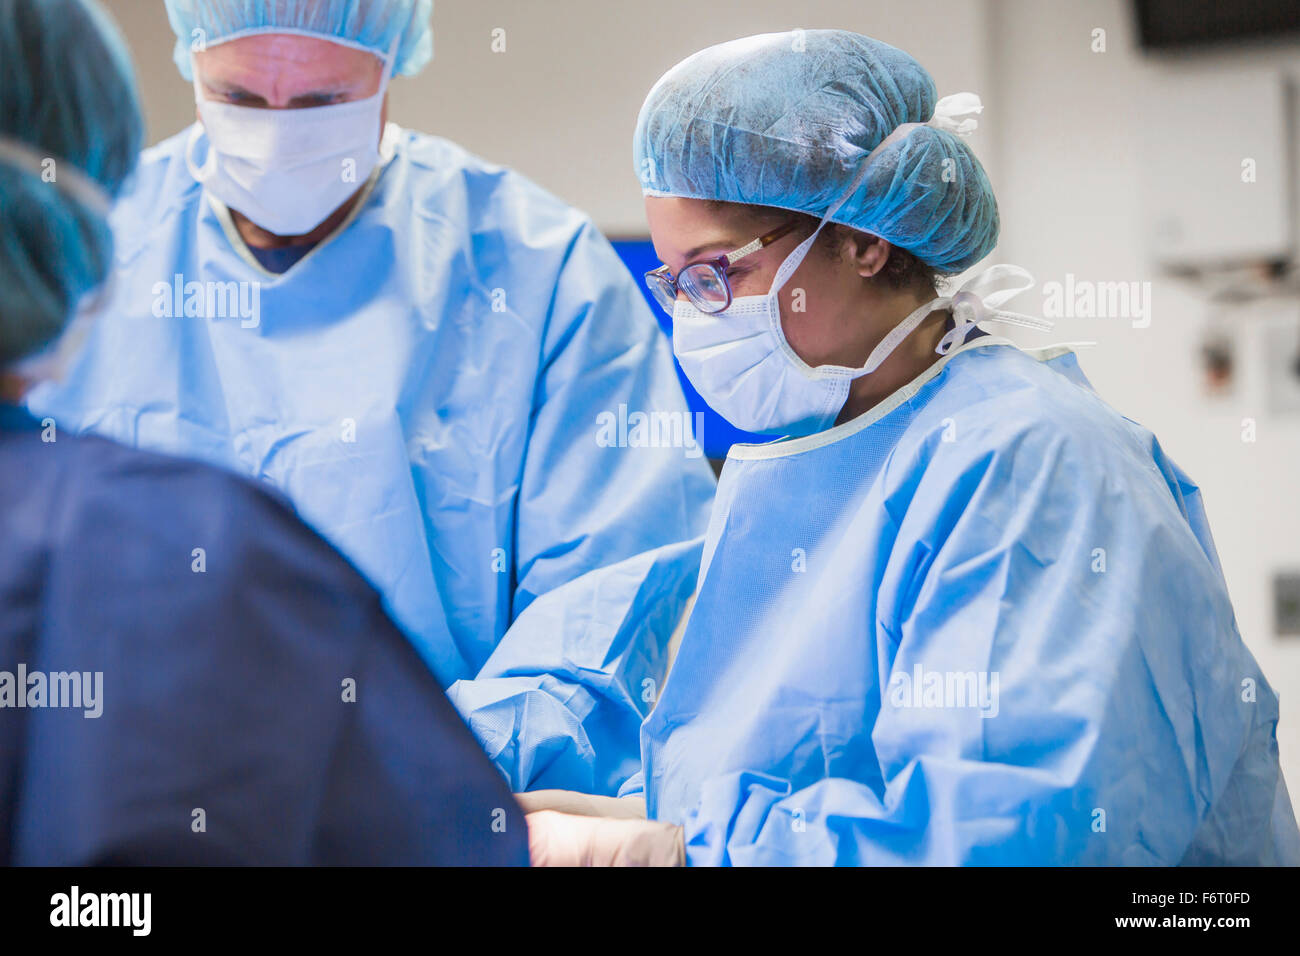 Surgeons working in operating room Stock Photo